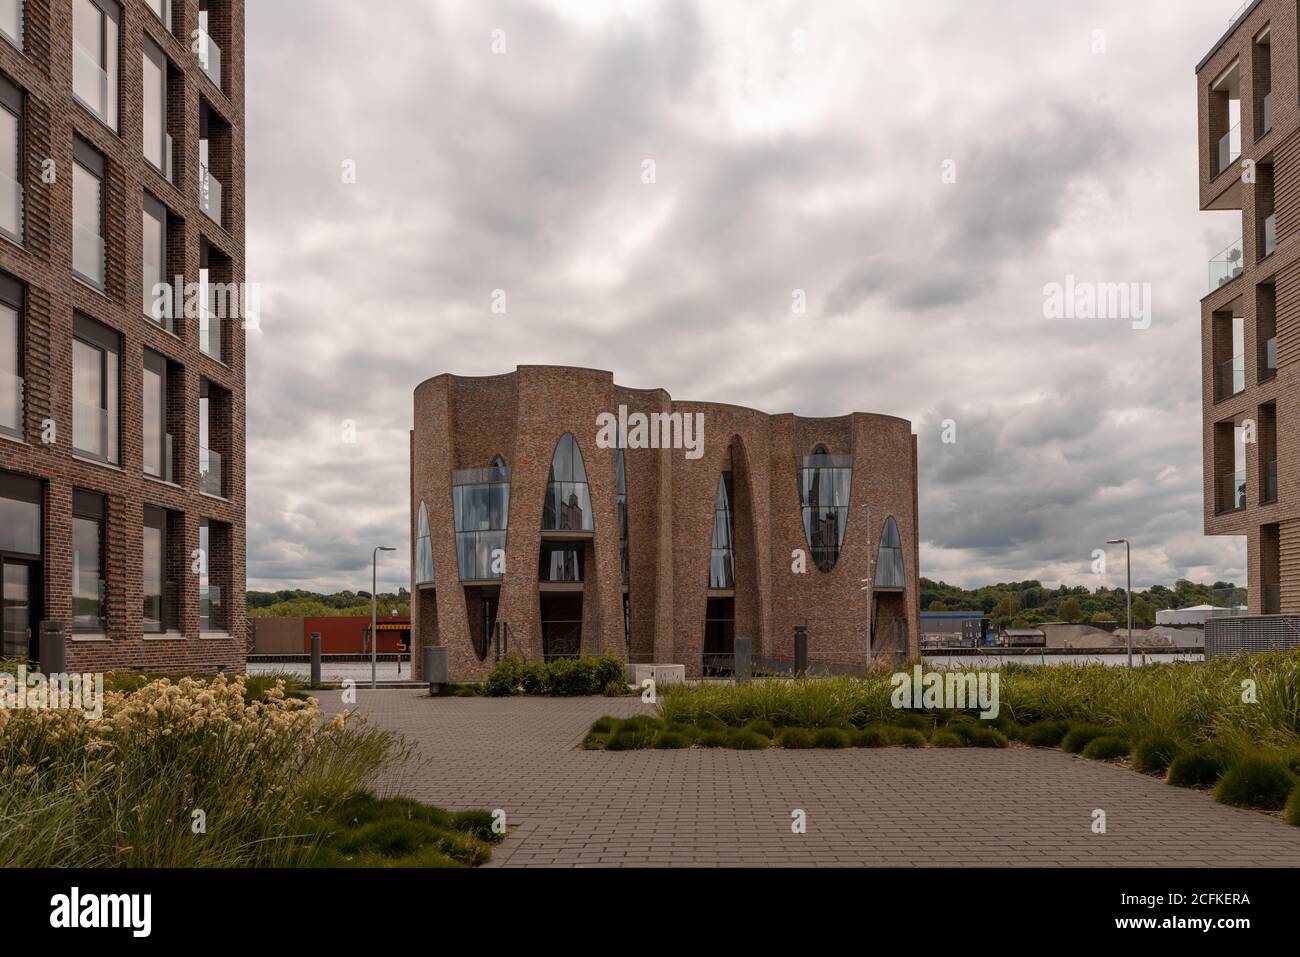 The iconic Fjordenhus between two houses in the harbour basin of Vejle, Denmark, June 9, 2020 Stock Photo